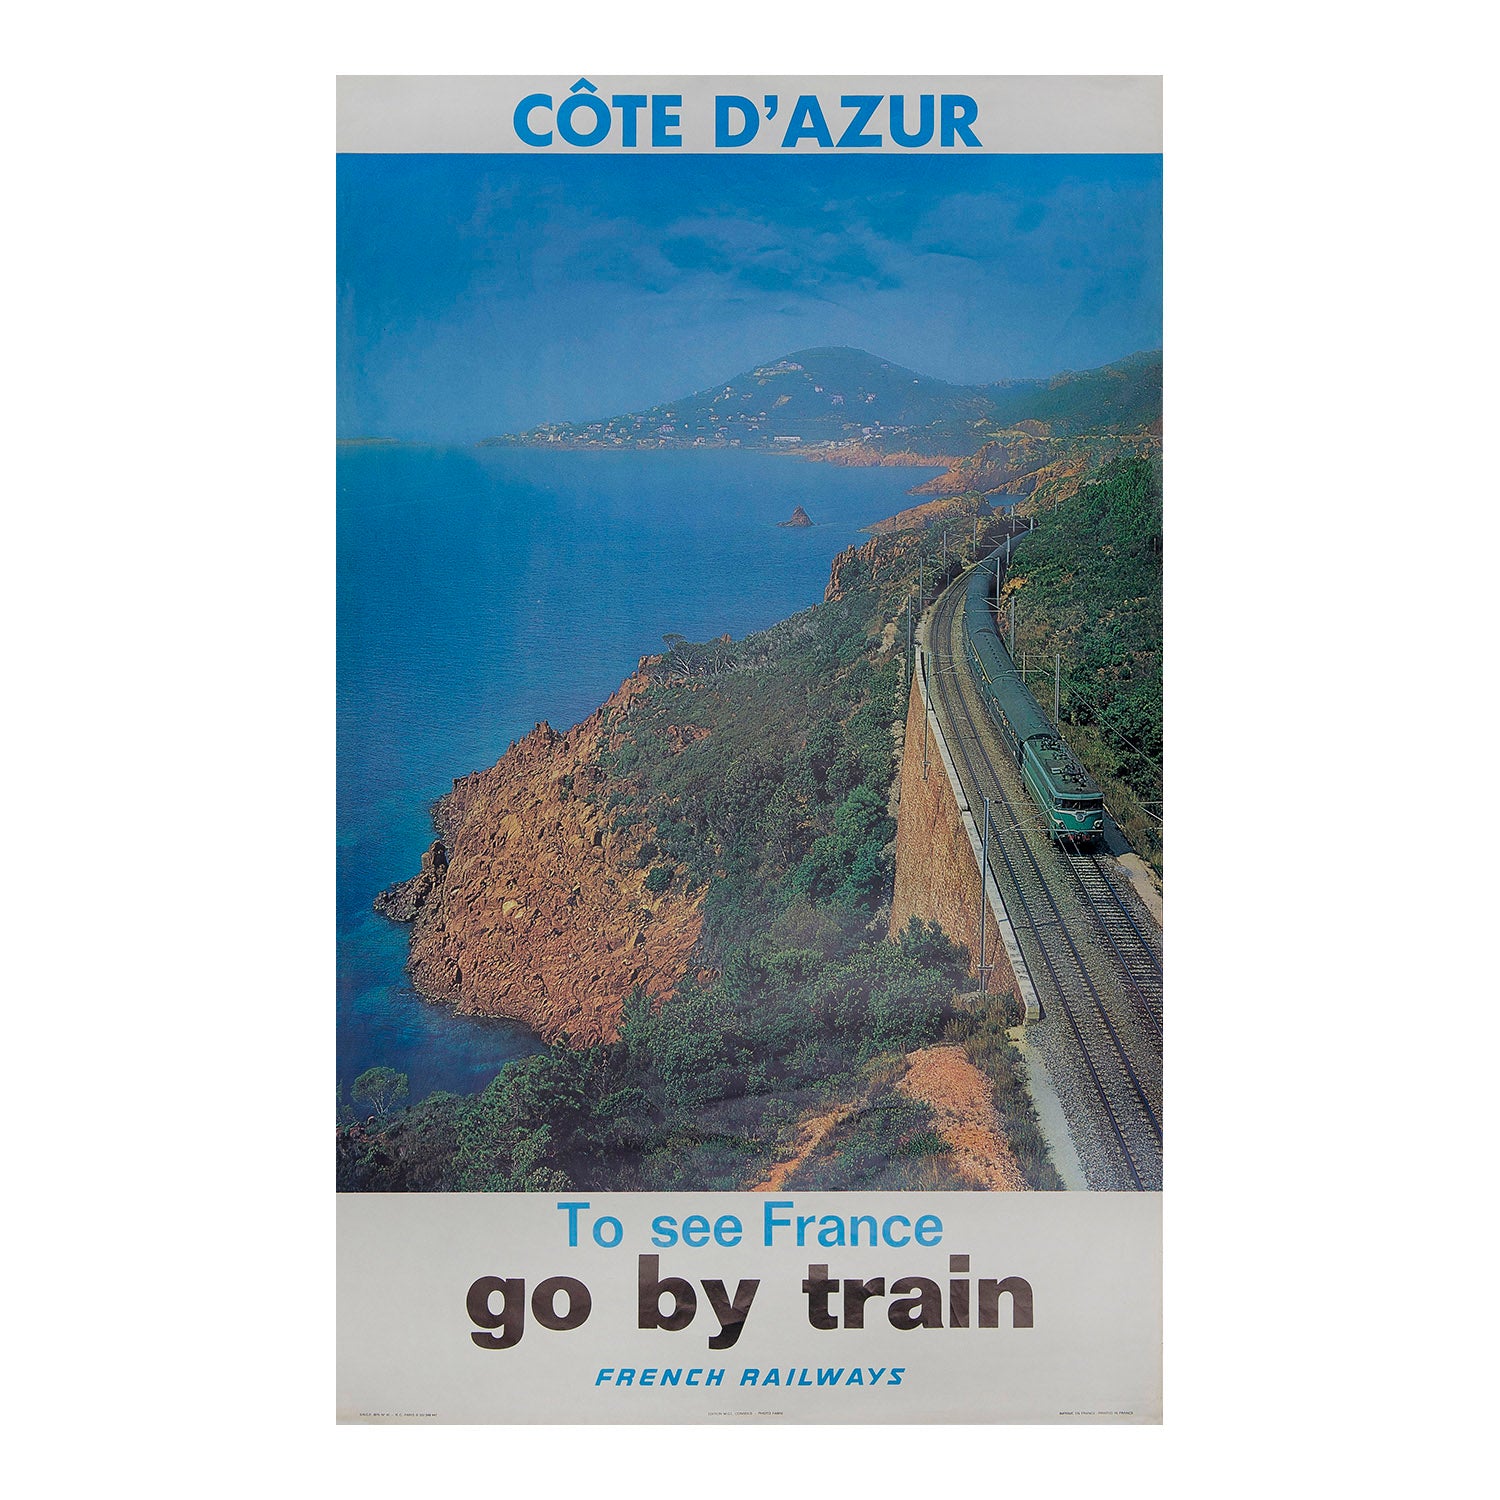 Côte d' Azur. To see France go by train. French Railways